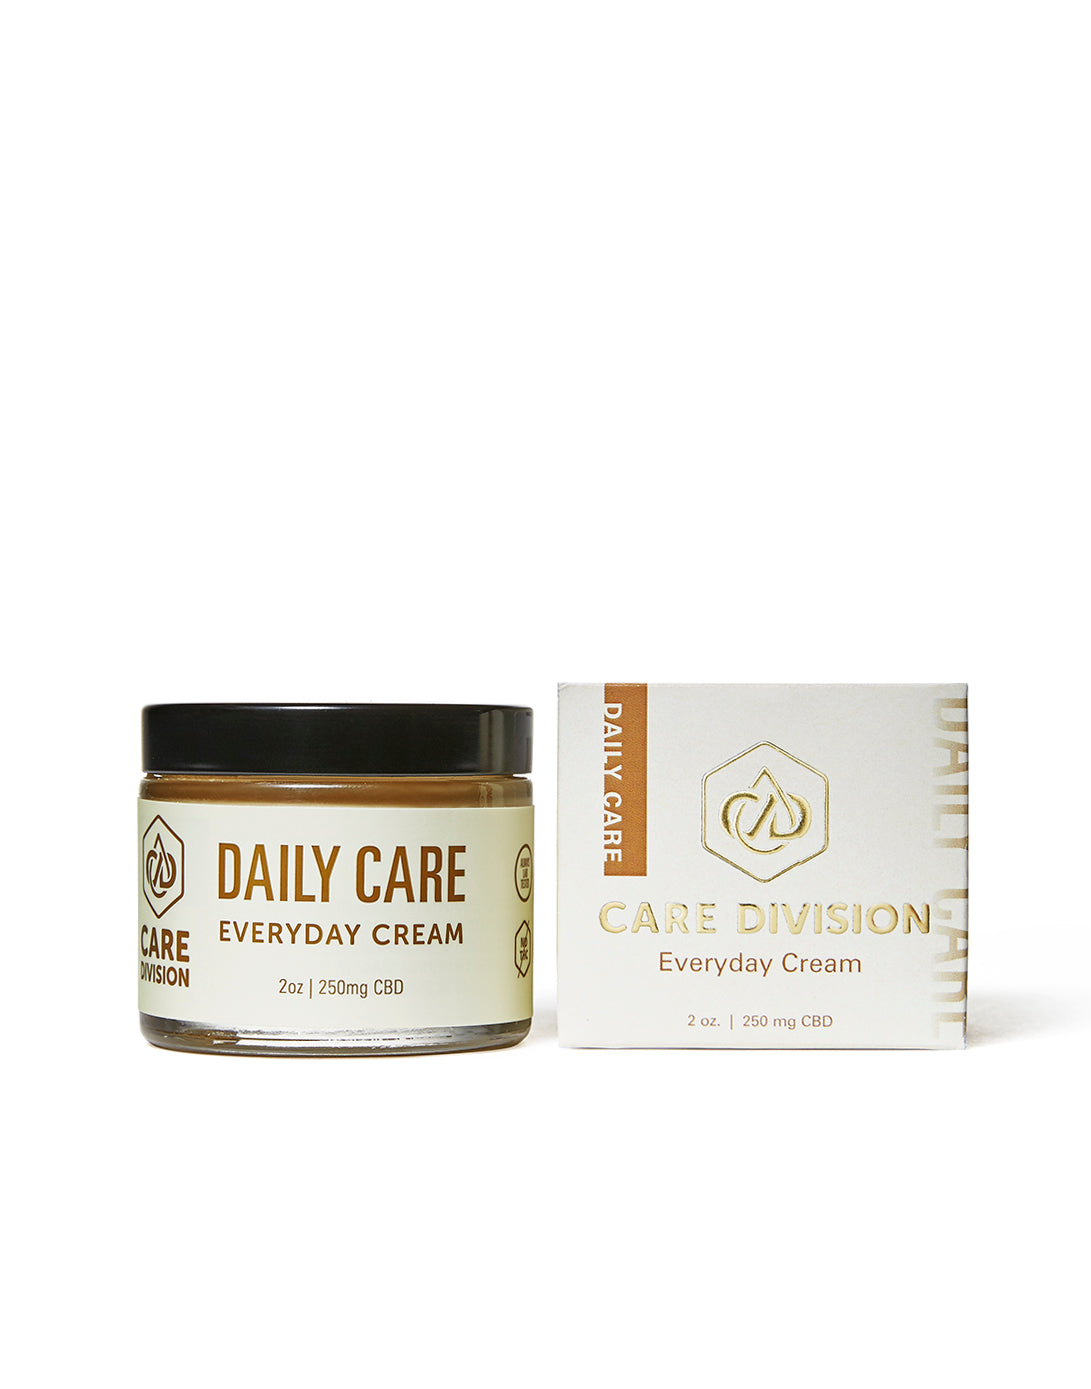 Daily Care